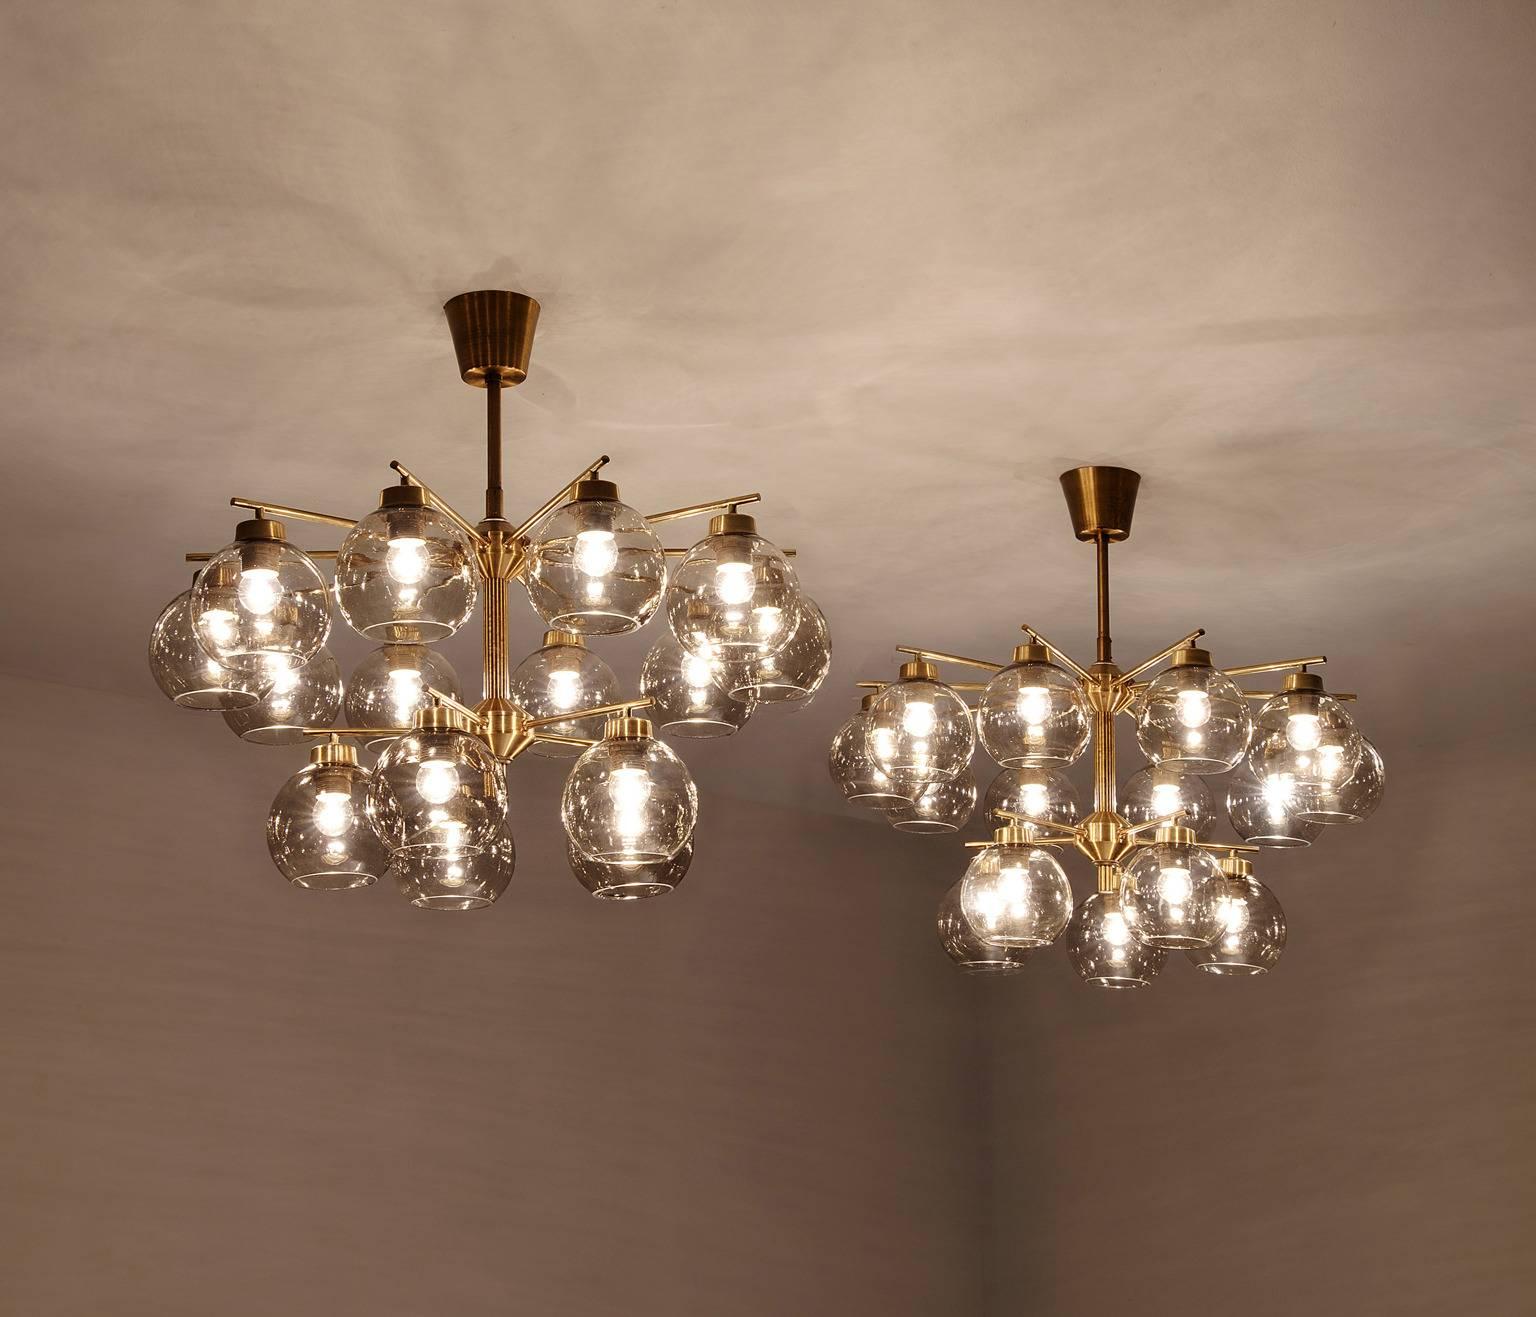 Hans-Agne Jakobsson for AB Markaryd, chandeliers, brass and glass, by Sweden, 1960s.

Swedish brass chandeliers with fifteen brass arms with smoked glass spheres. Divided over two levels, the light created by these chandeliers is very pleasant and